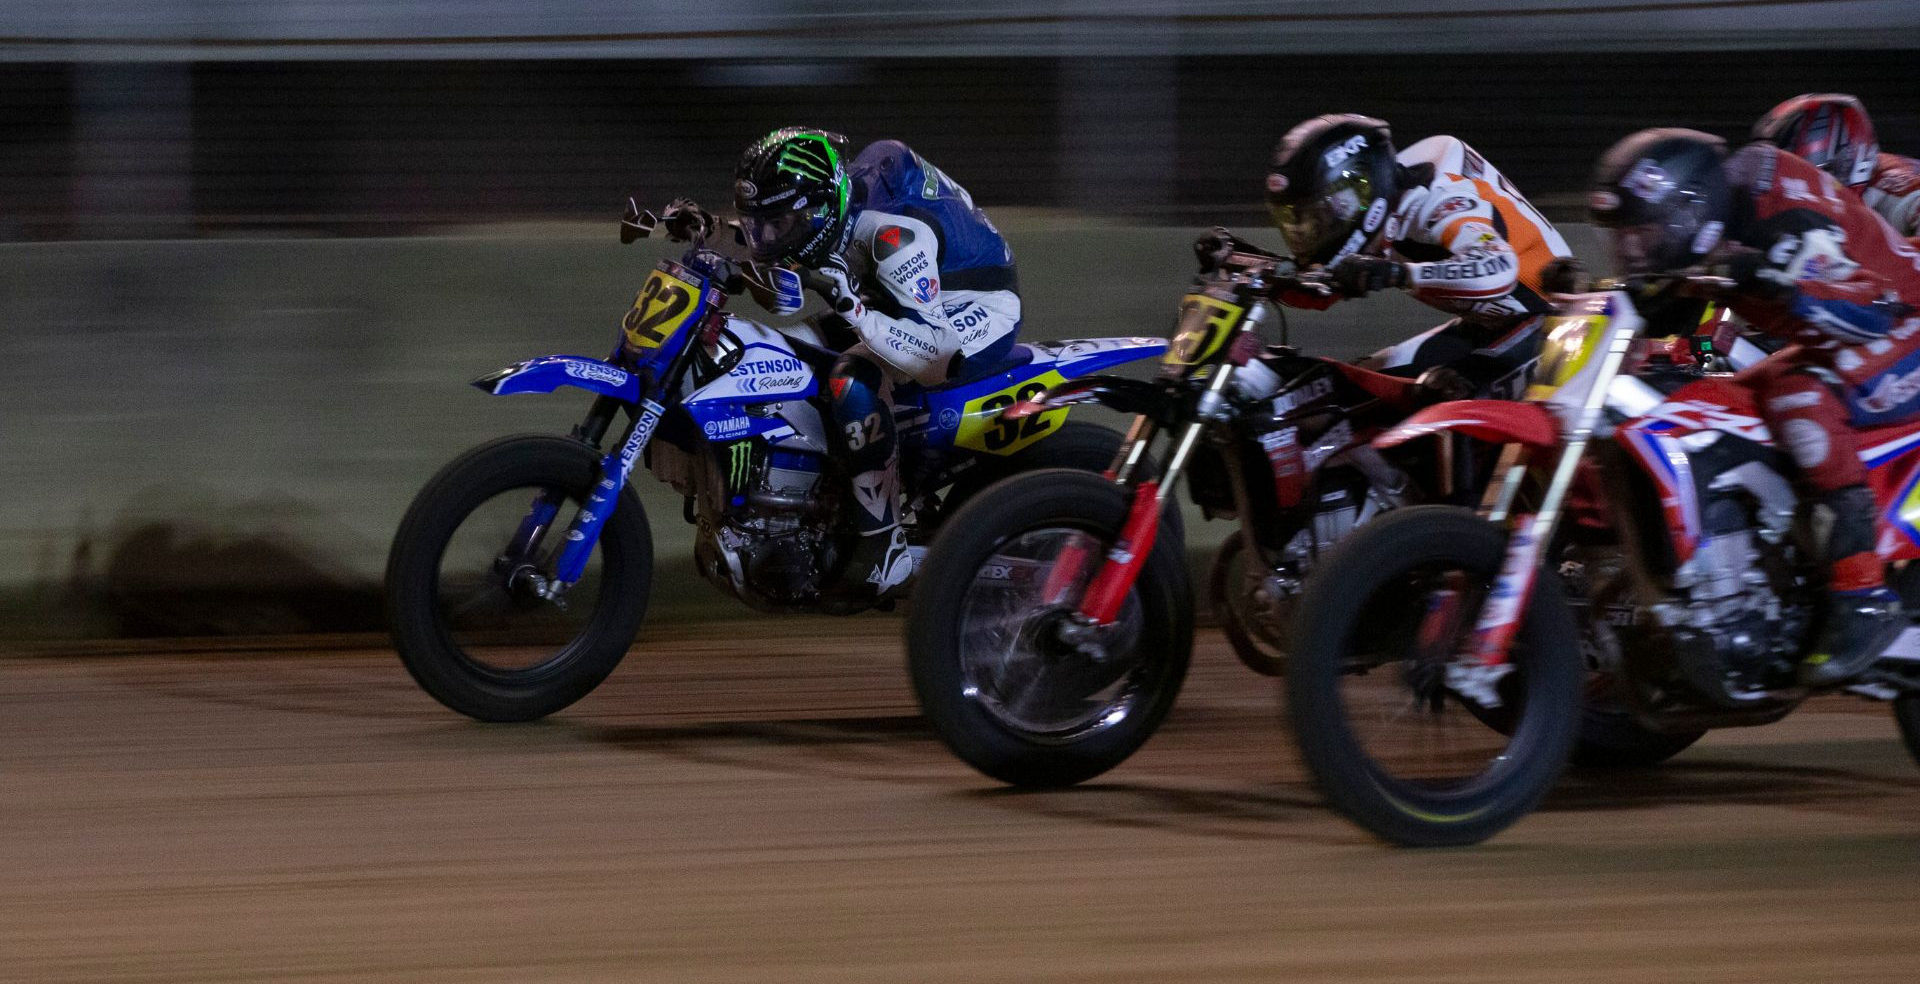 Dallas Daniels (32) edges ahead of other riders during an AFT Singles race at the Indy Mile. Photo courtesy Yamaha.